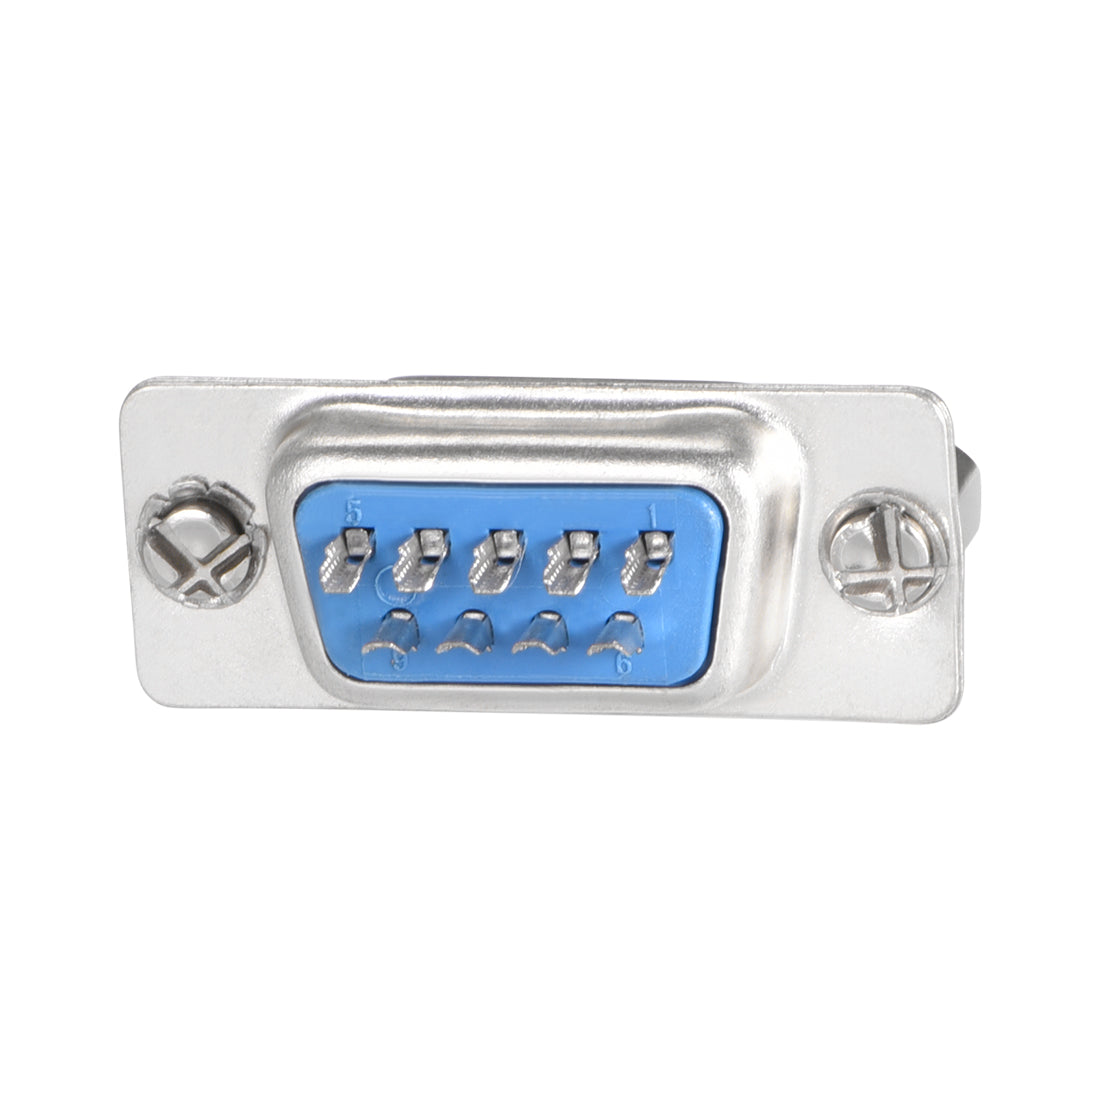 uxcell Uxcell D-sub Connector Male Plug 9-pin 2-row Port Terminal Breakout for Mechanical Equipment CNC Computers Blue 5pcs